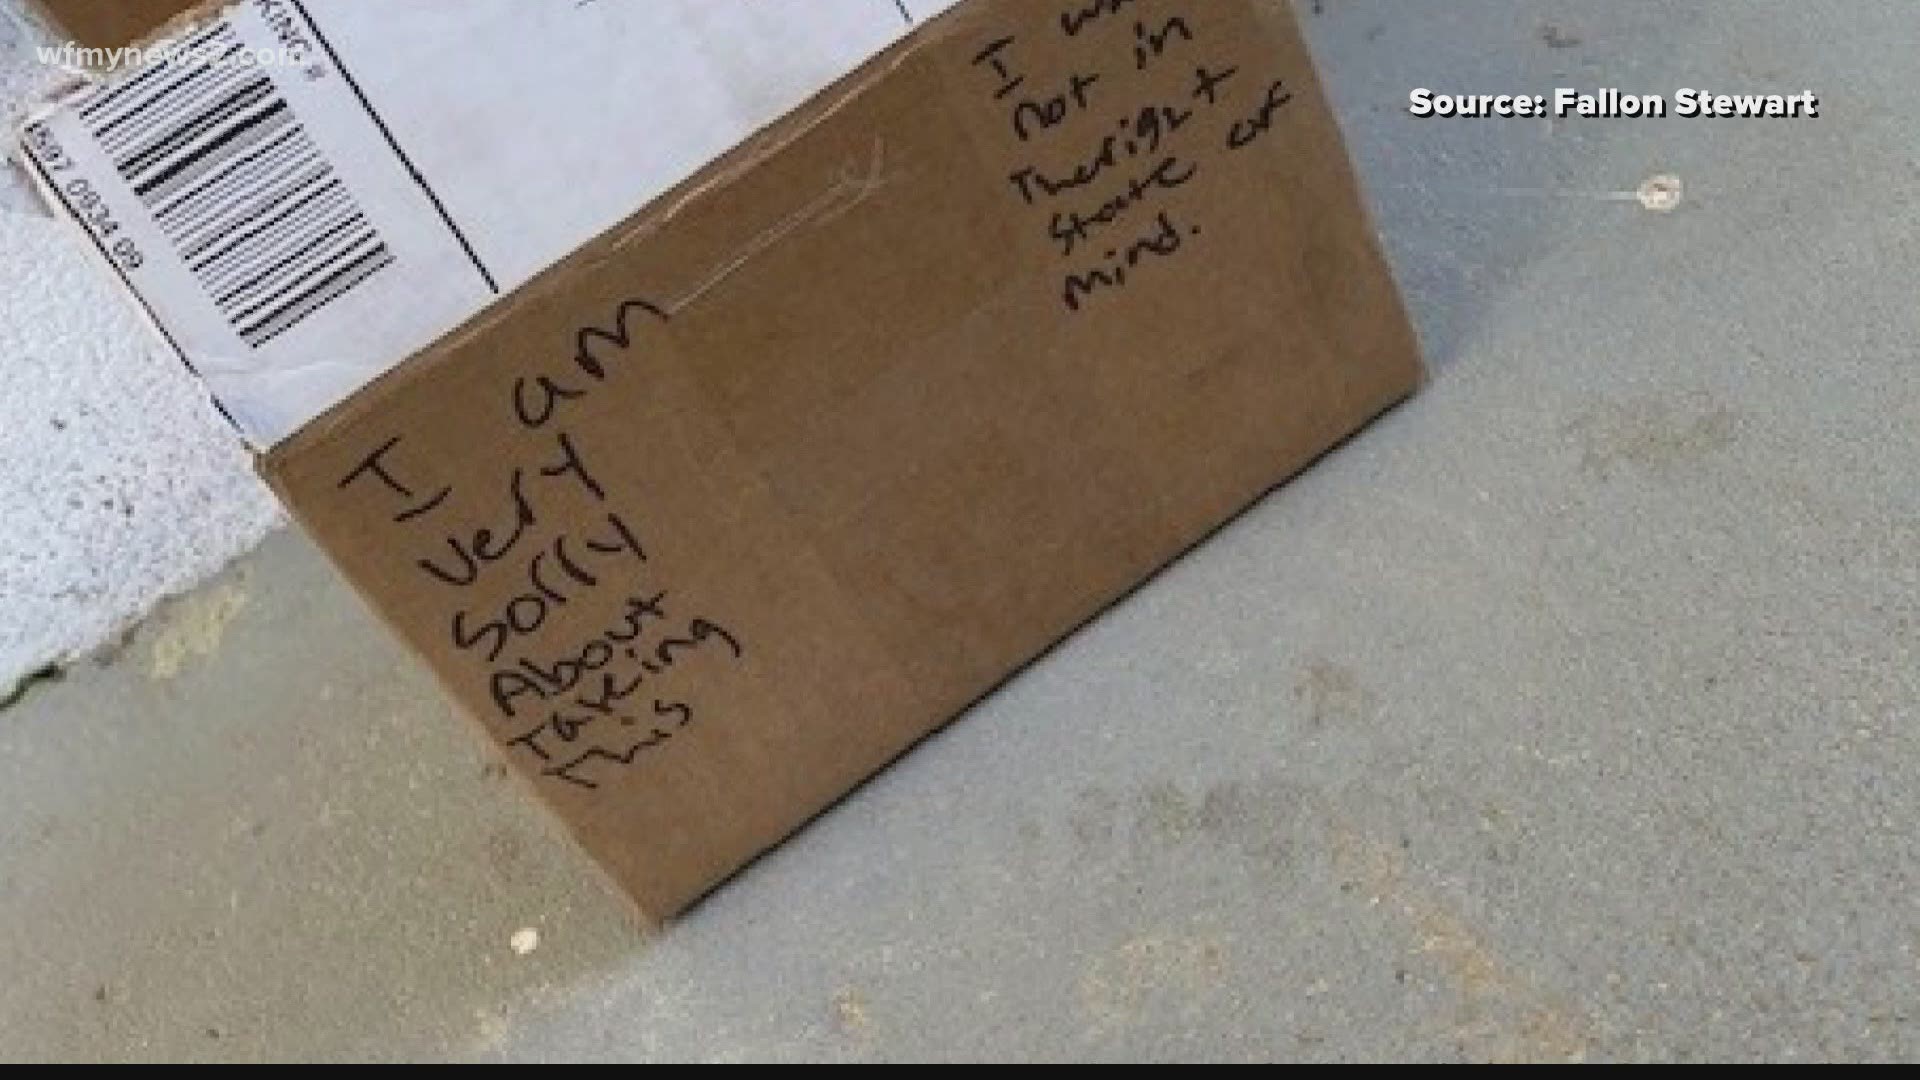 The thief returned one package, but Fallon Stewart told him to go get the rest and bring it back.